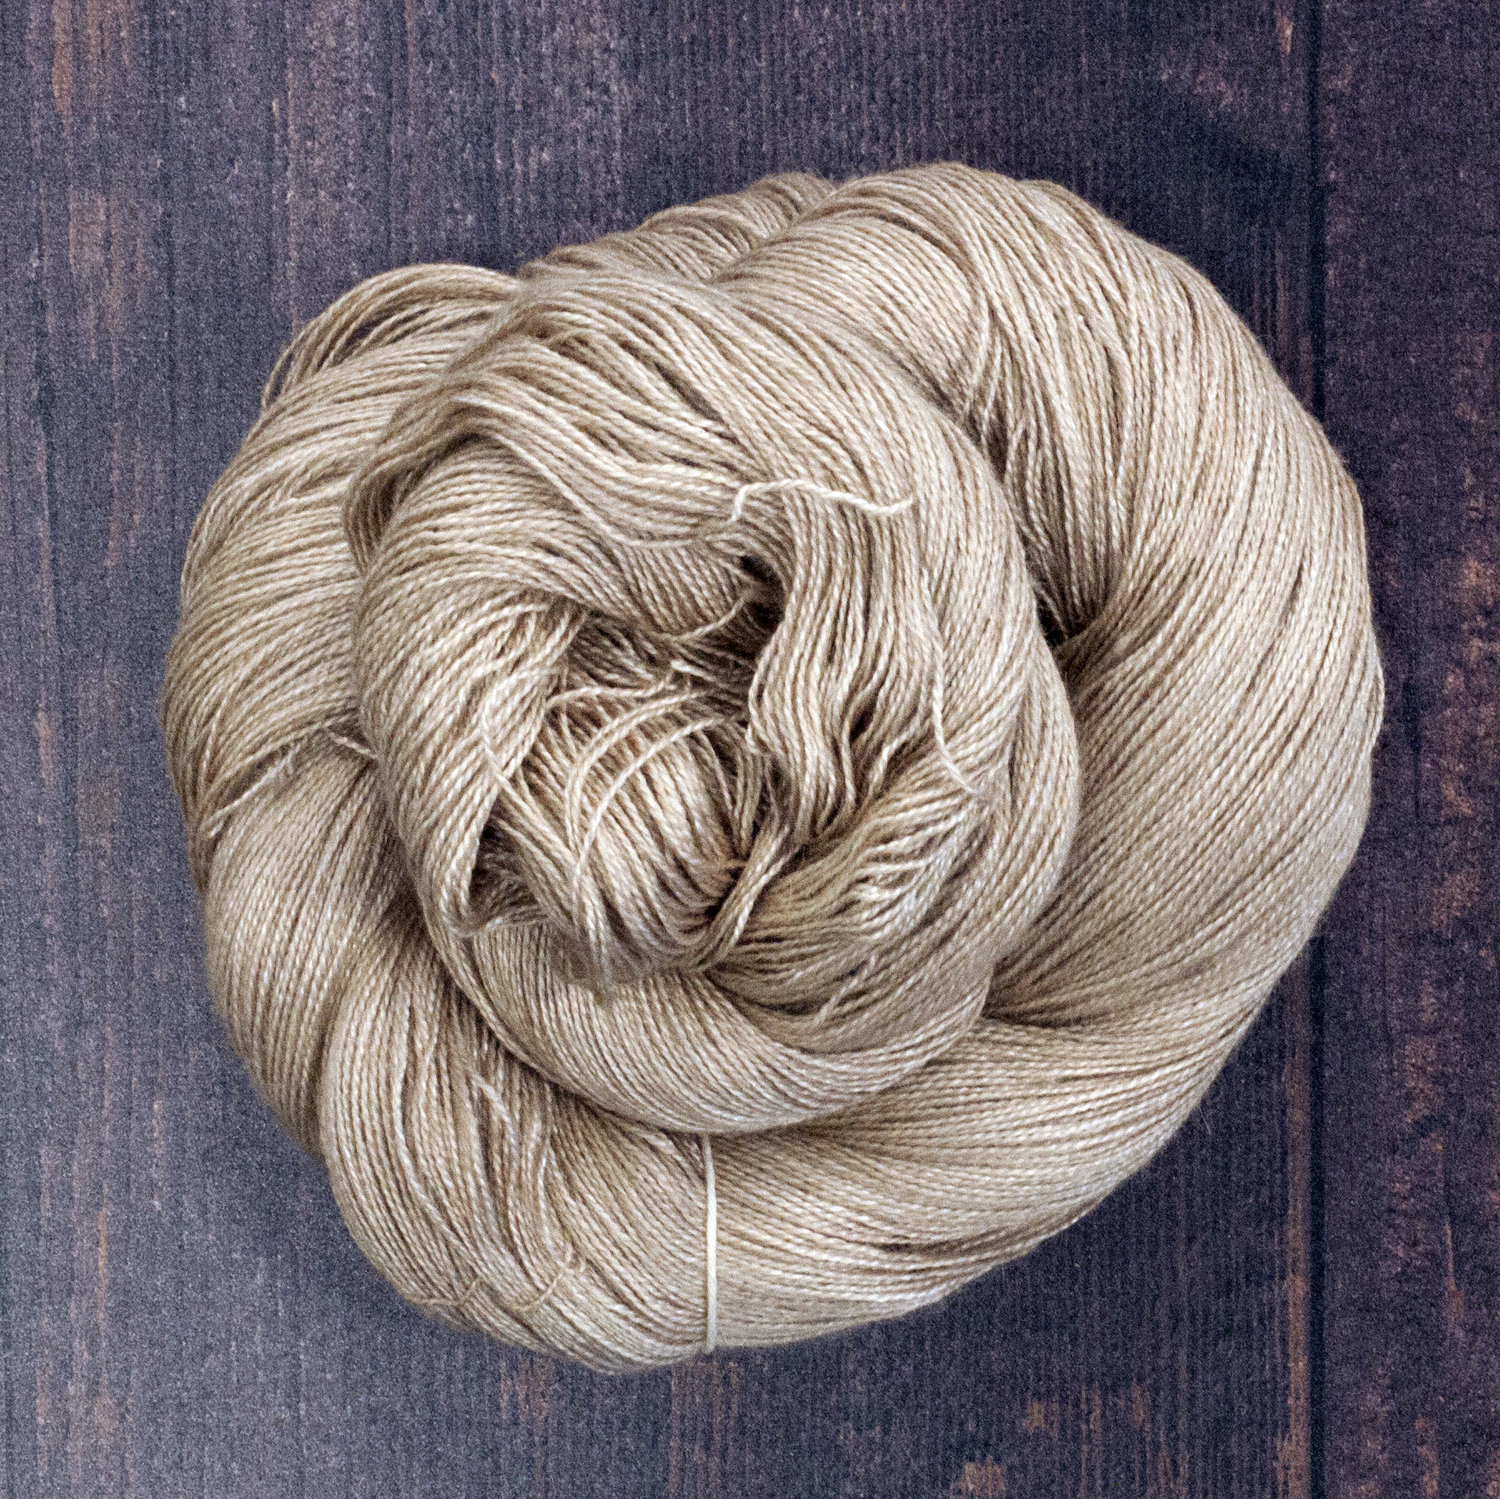 Buy Yarn BABY CAMEL-4 (color: Golden Beige, 4-ply, 50 г 140 м) from 100%  natural material